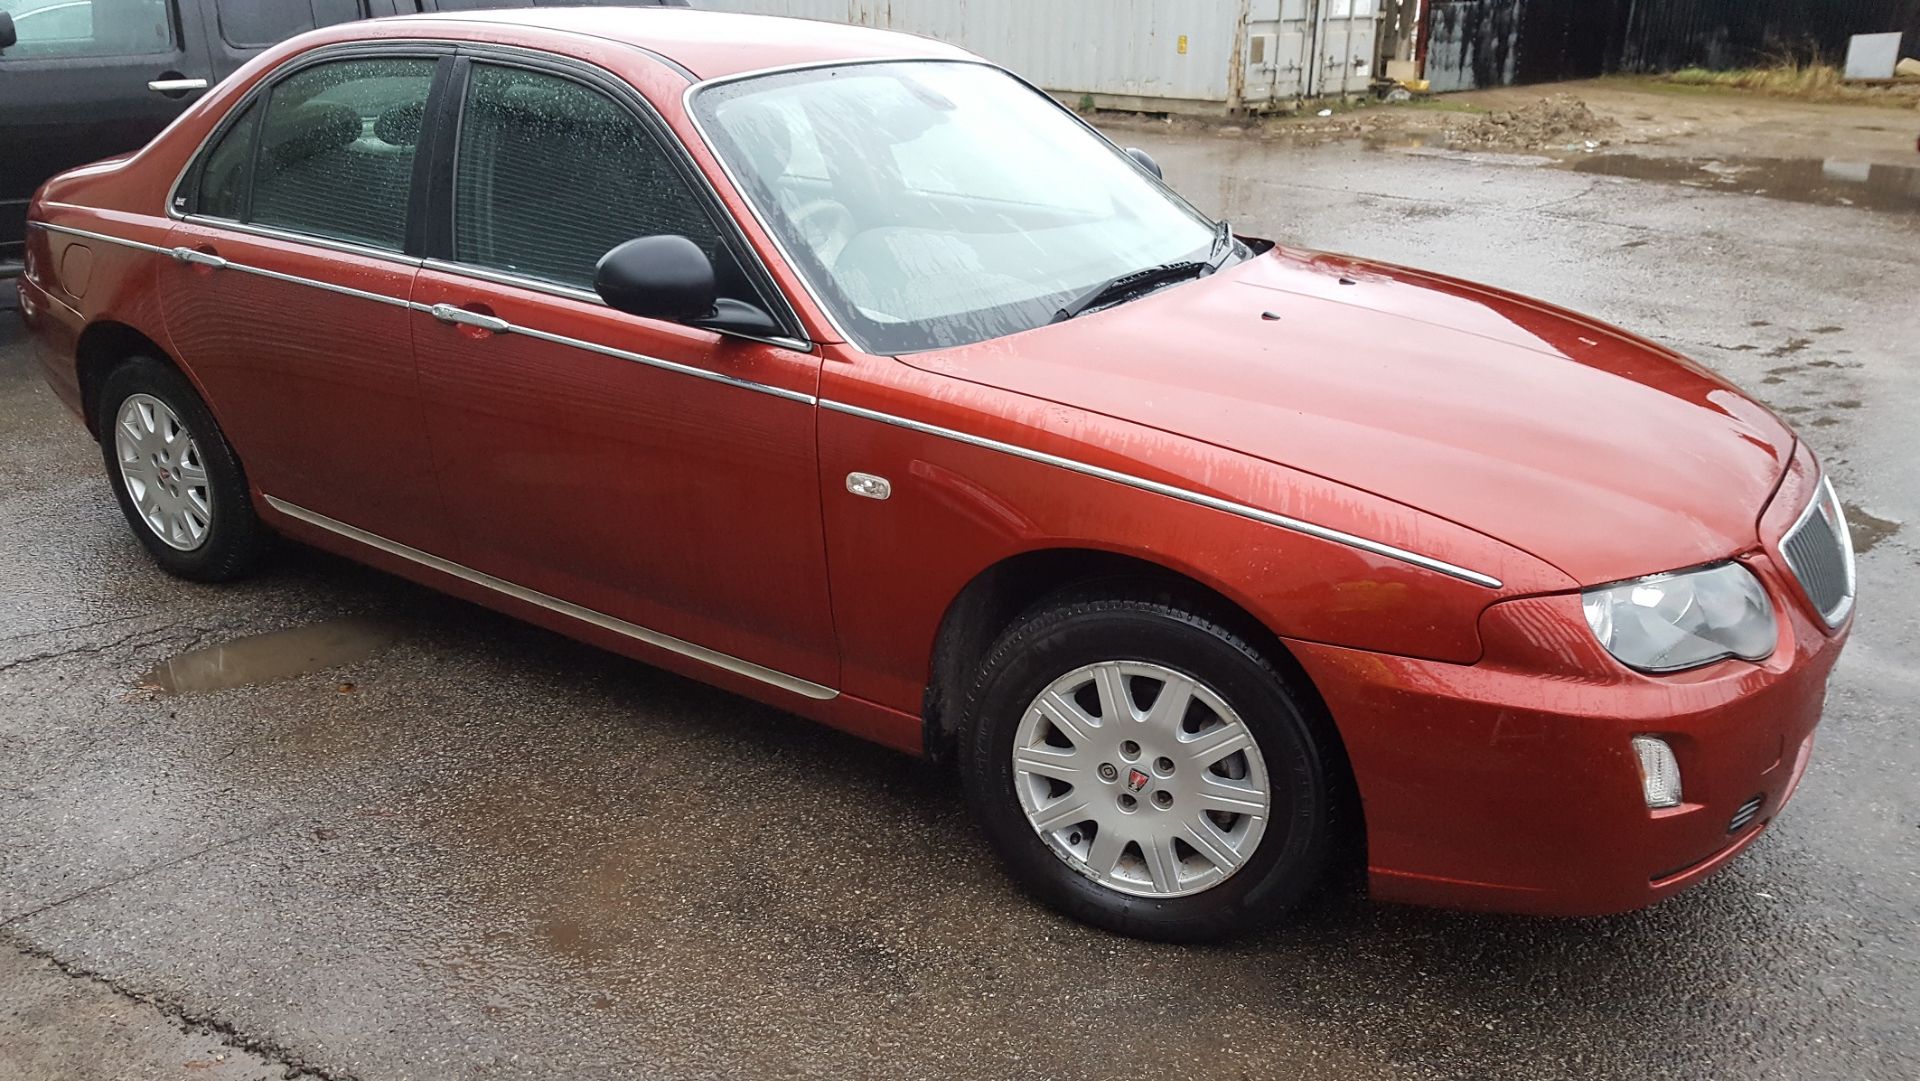 2004/54 REG ROVER 75 CLASSIC RED PETROL 4 DOOR SALOON, SHOWING 1 FORMER KEEPER *NO VAT* - Image 4 of 9